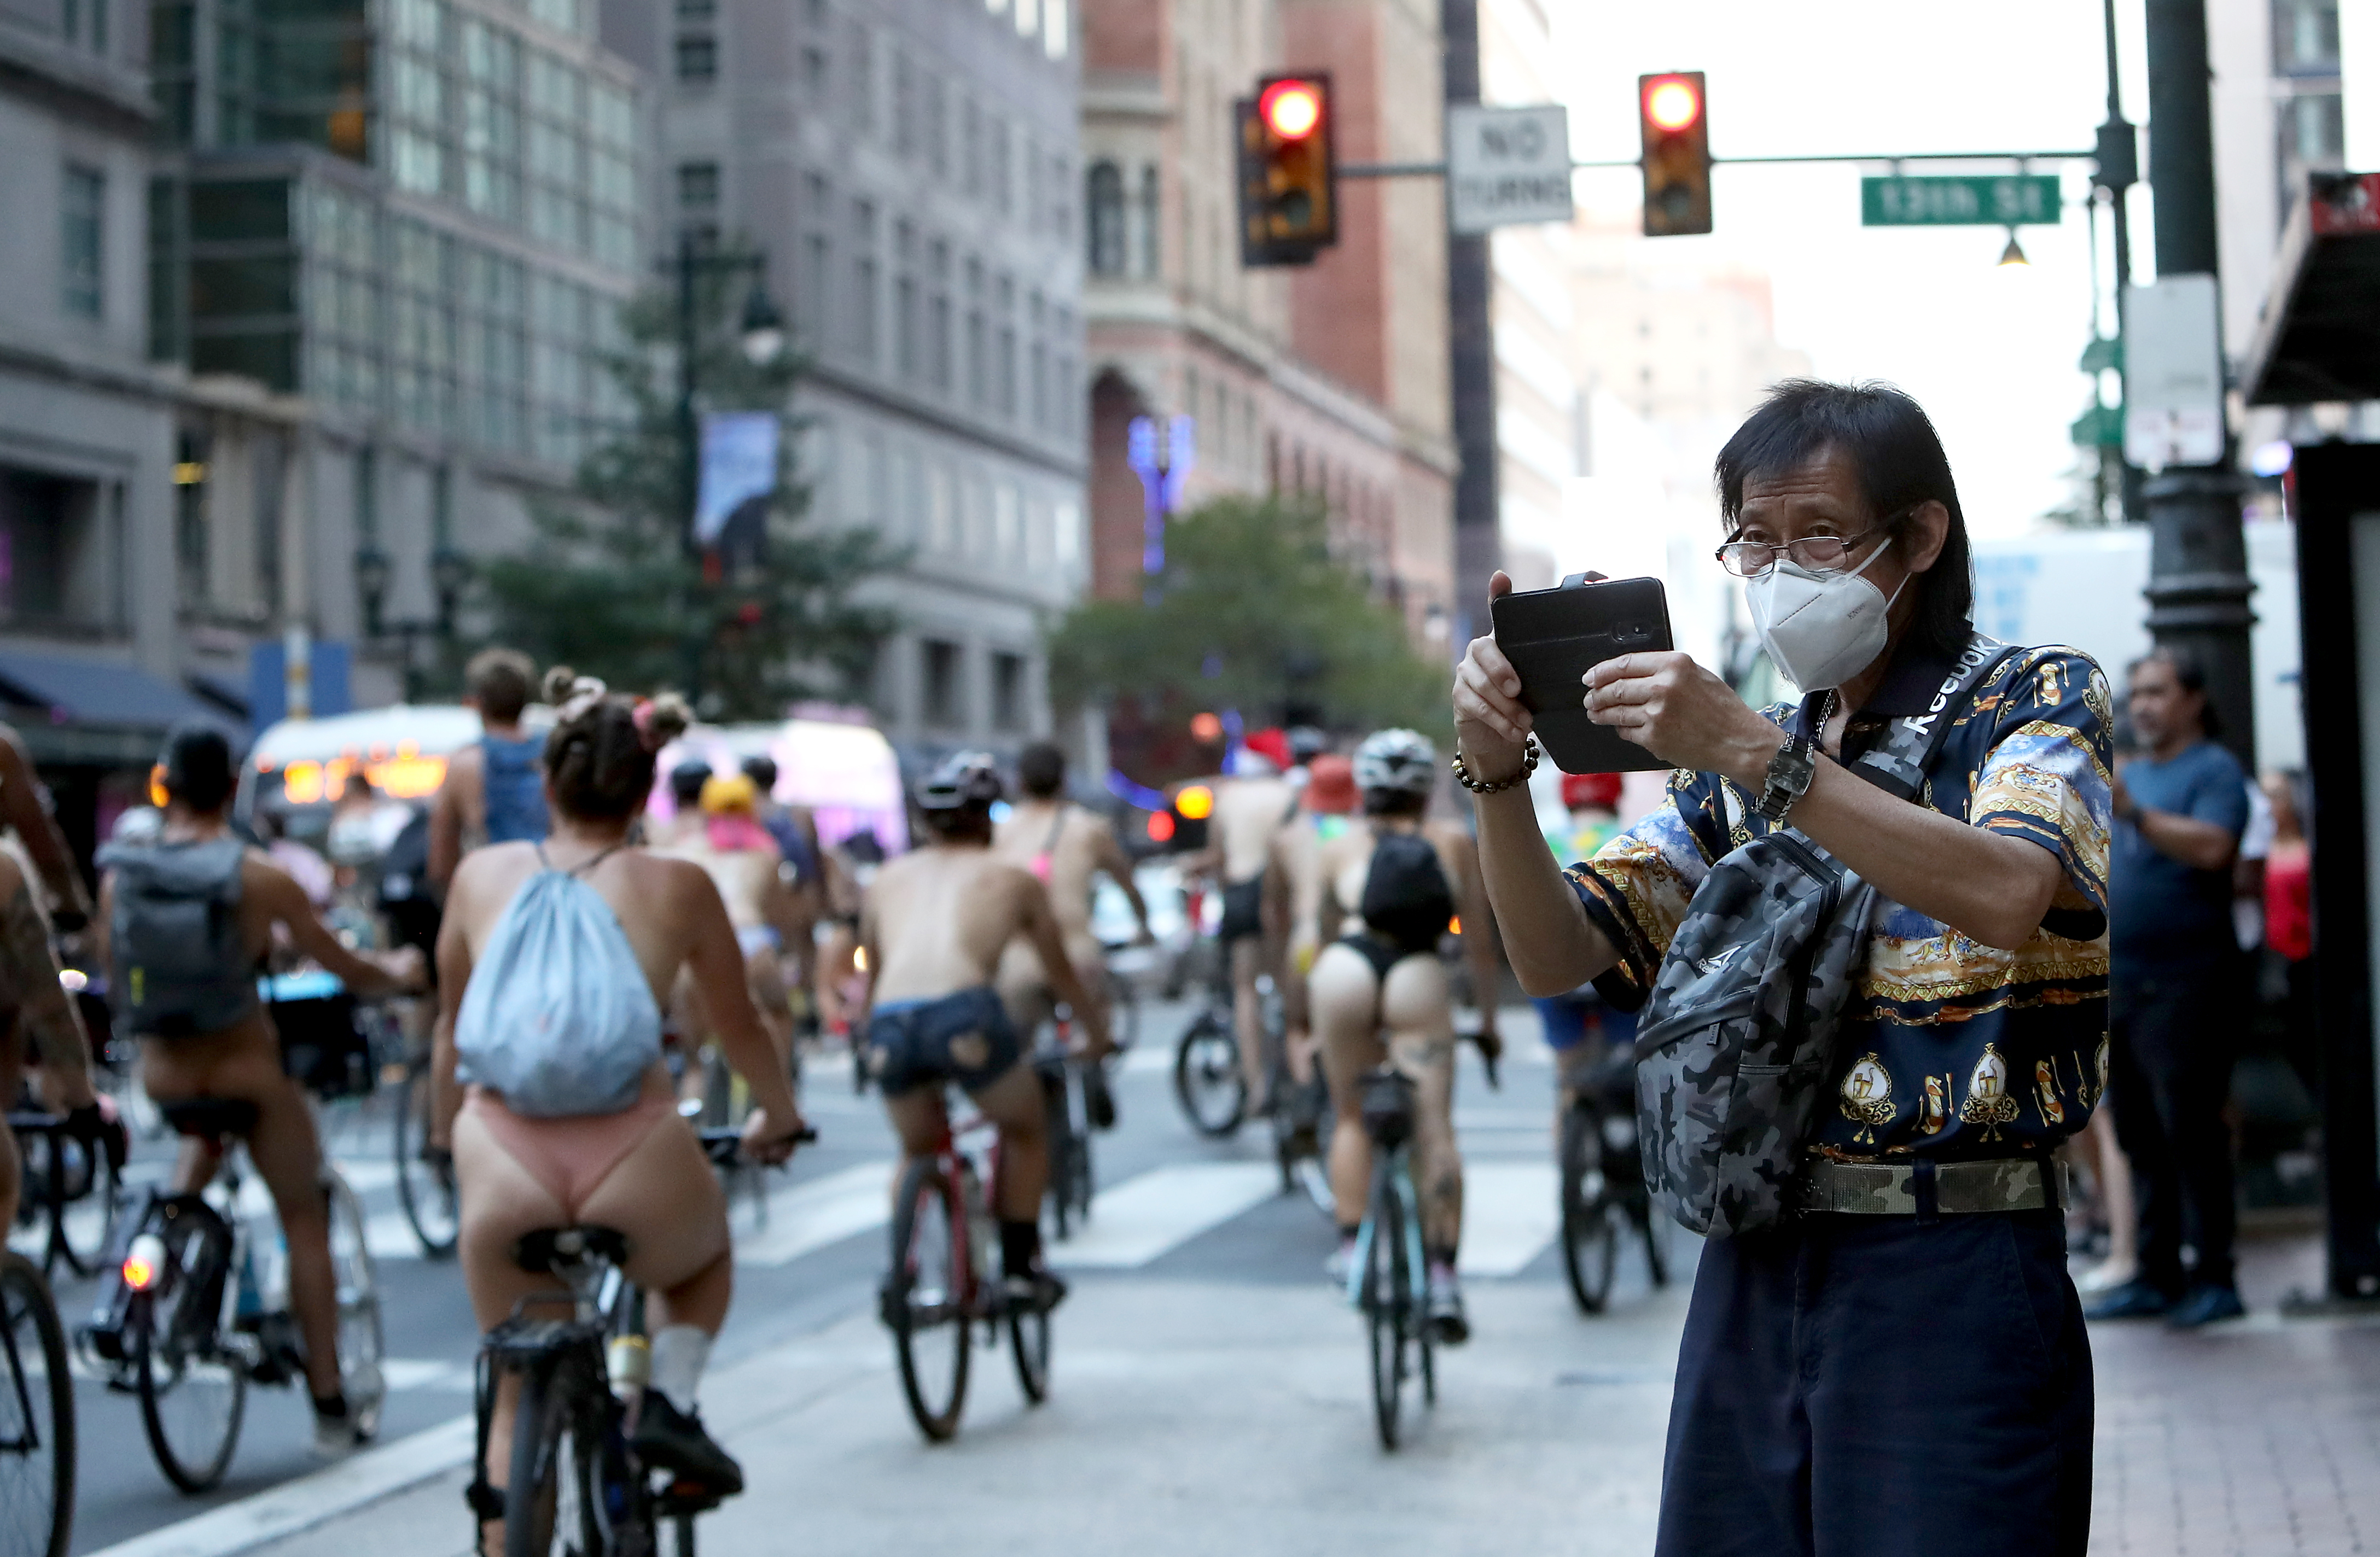 A man records as people ride bikes along Market Street in Philadelphia during the Philly Naked Bike Ride, Saturday, Aug. 27, 2022.